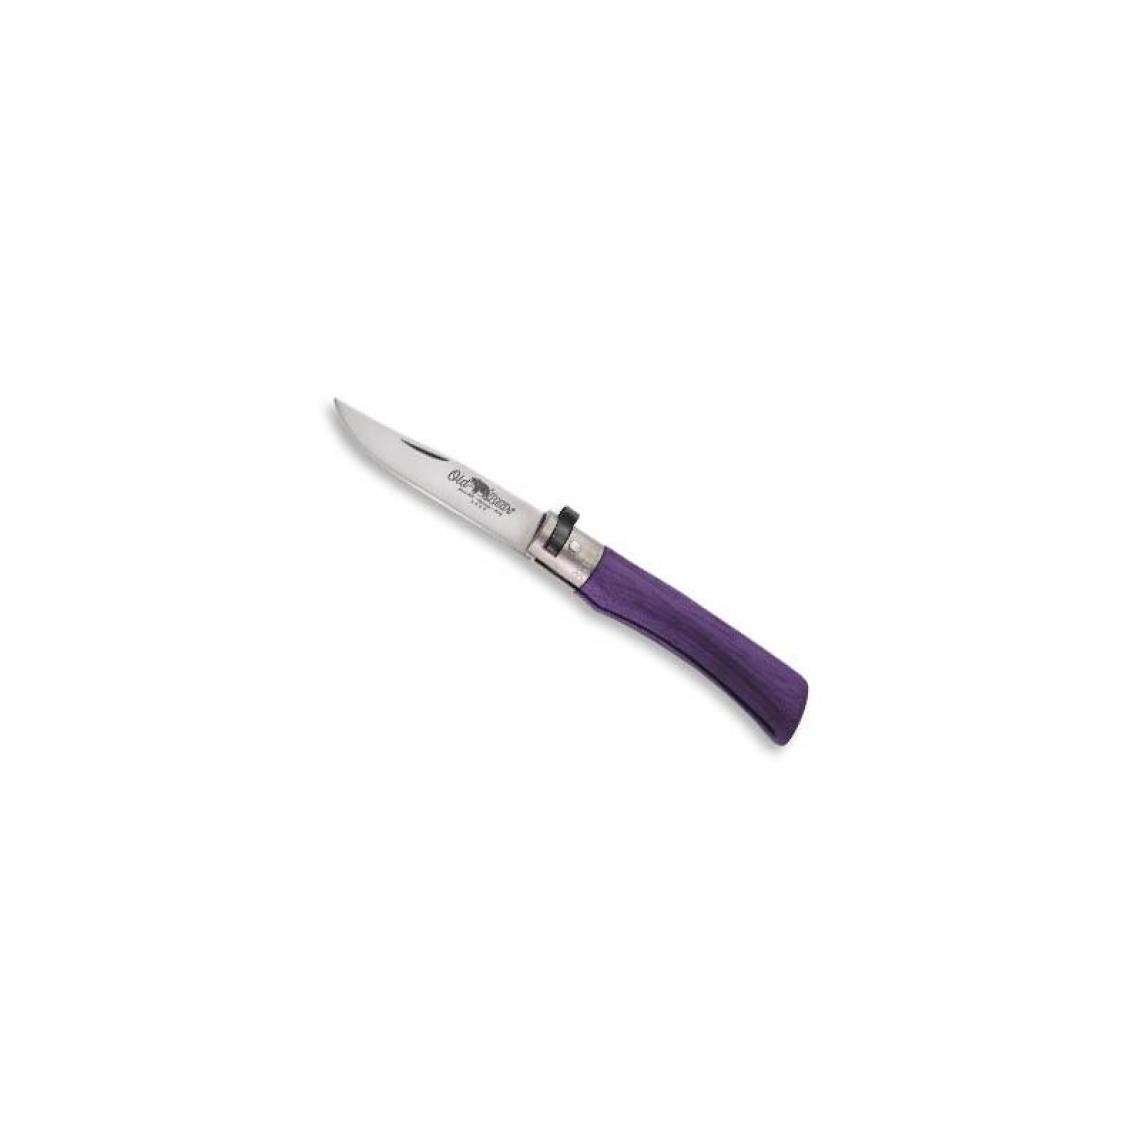 Divers Marques - OLD BEAR - 324.S - COUTEAU OLD BEAR FULL COLOR VIOLET TAILLE S - Outils de coupe